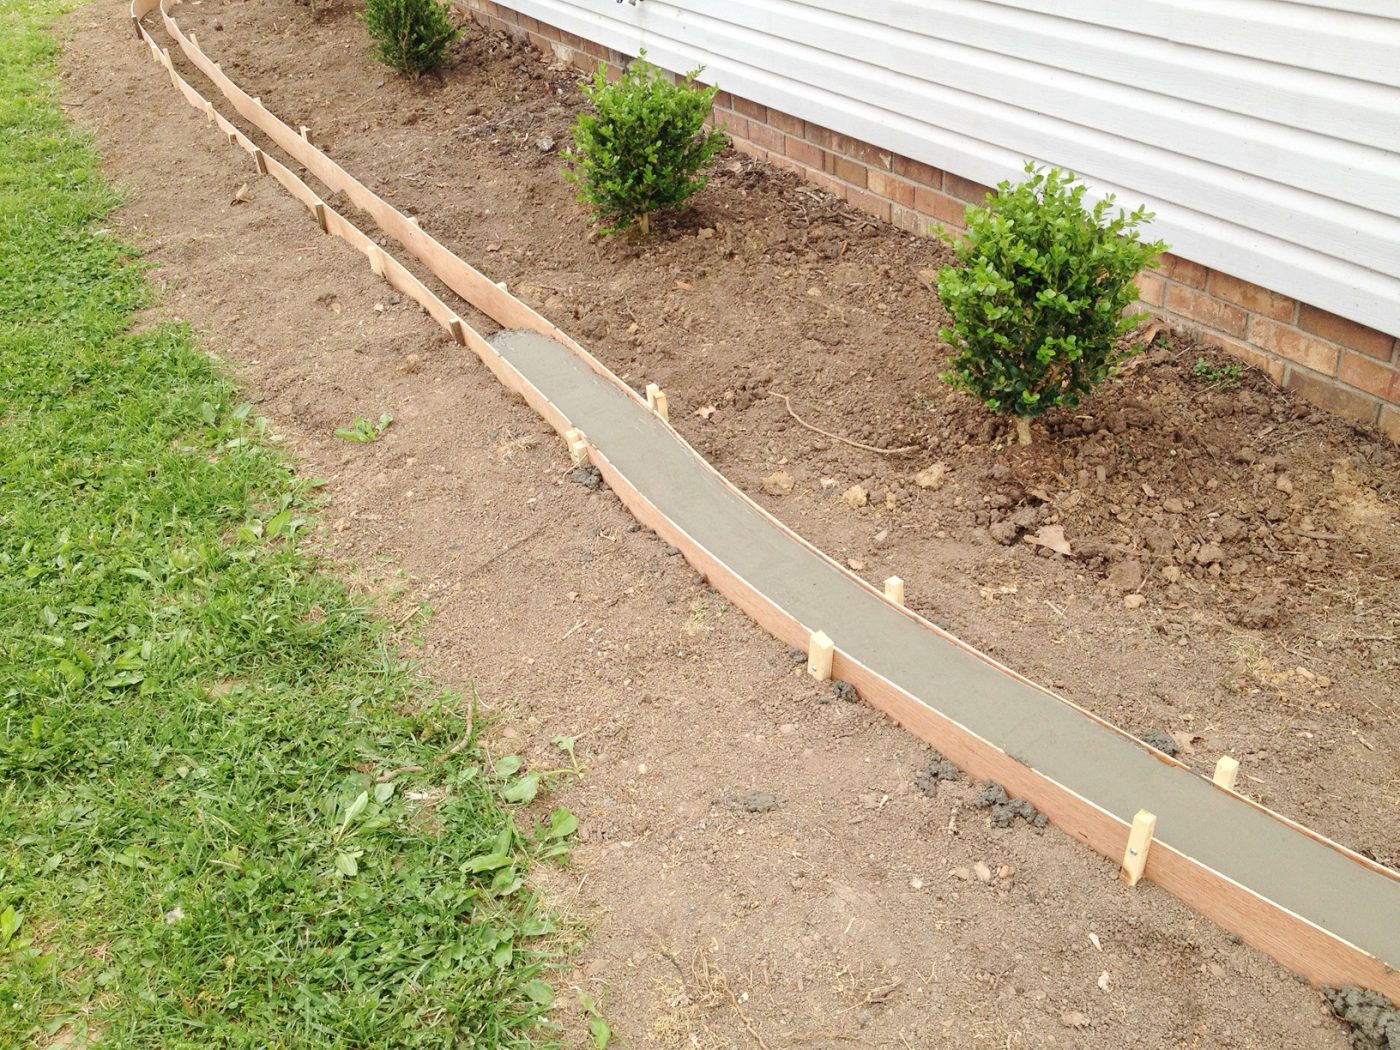 Updating Landscaping by adding a concrete edge